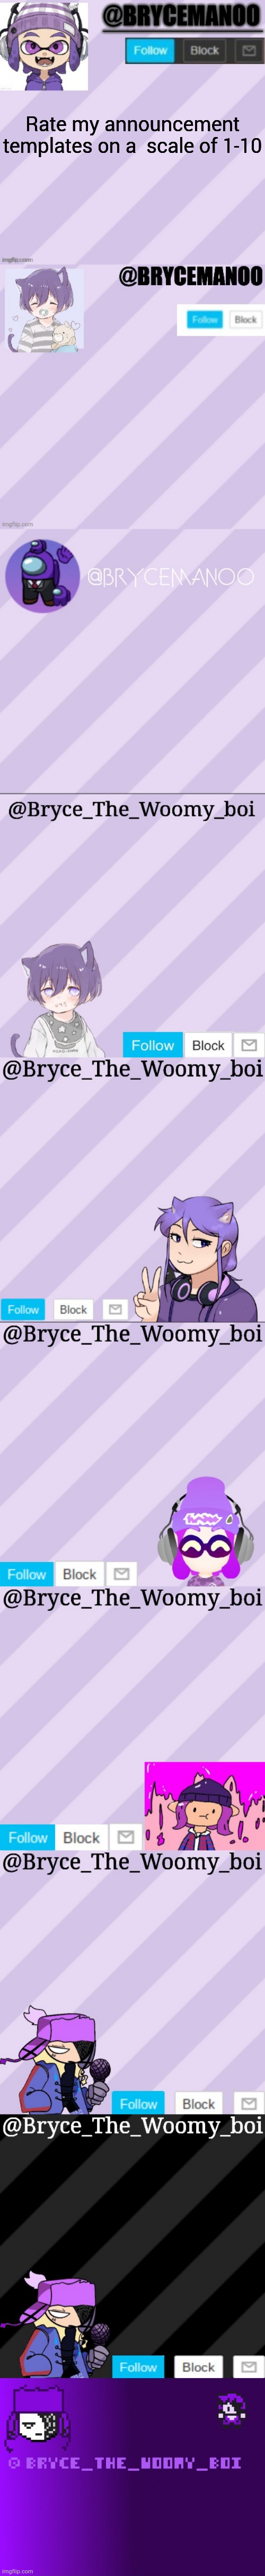 Rate my announcement templates on a  scale of 1-10 | image tagged in brycemanoo announcement temple,brycemanoo new announcement template,brycemanoo new new announcement template,bryce_the_woomy_boi | made w/ Imgflip meme maker